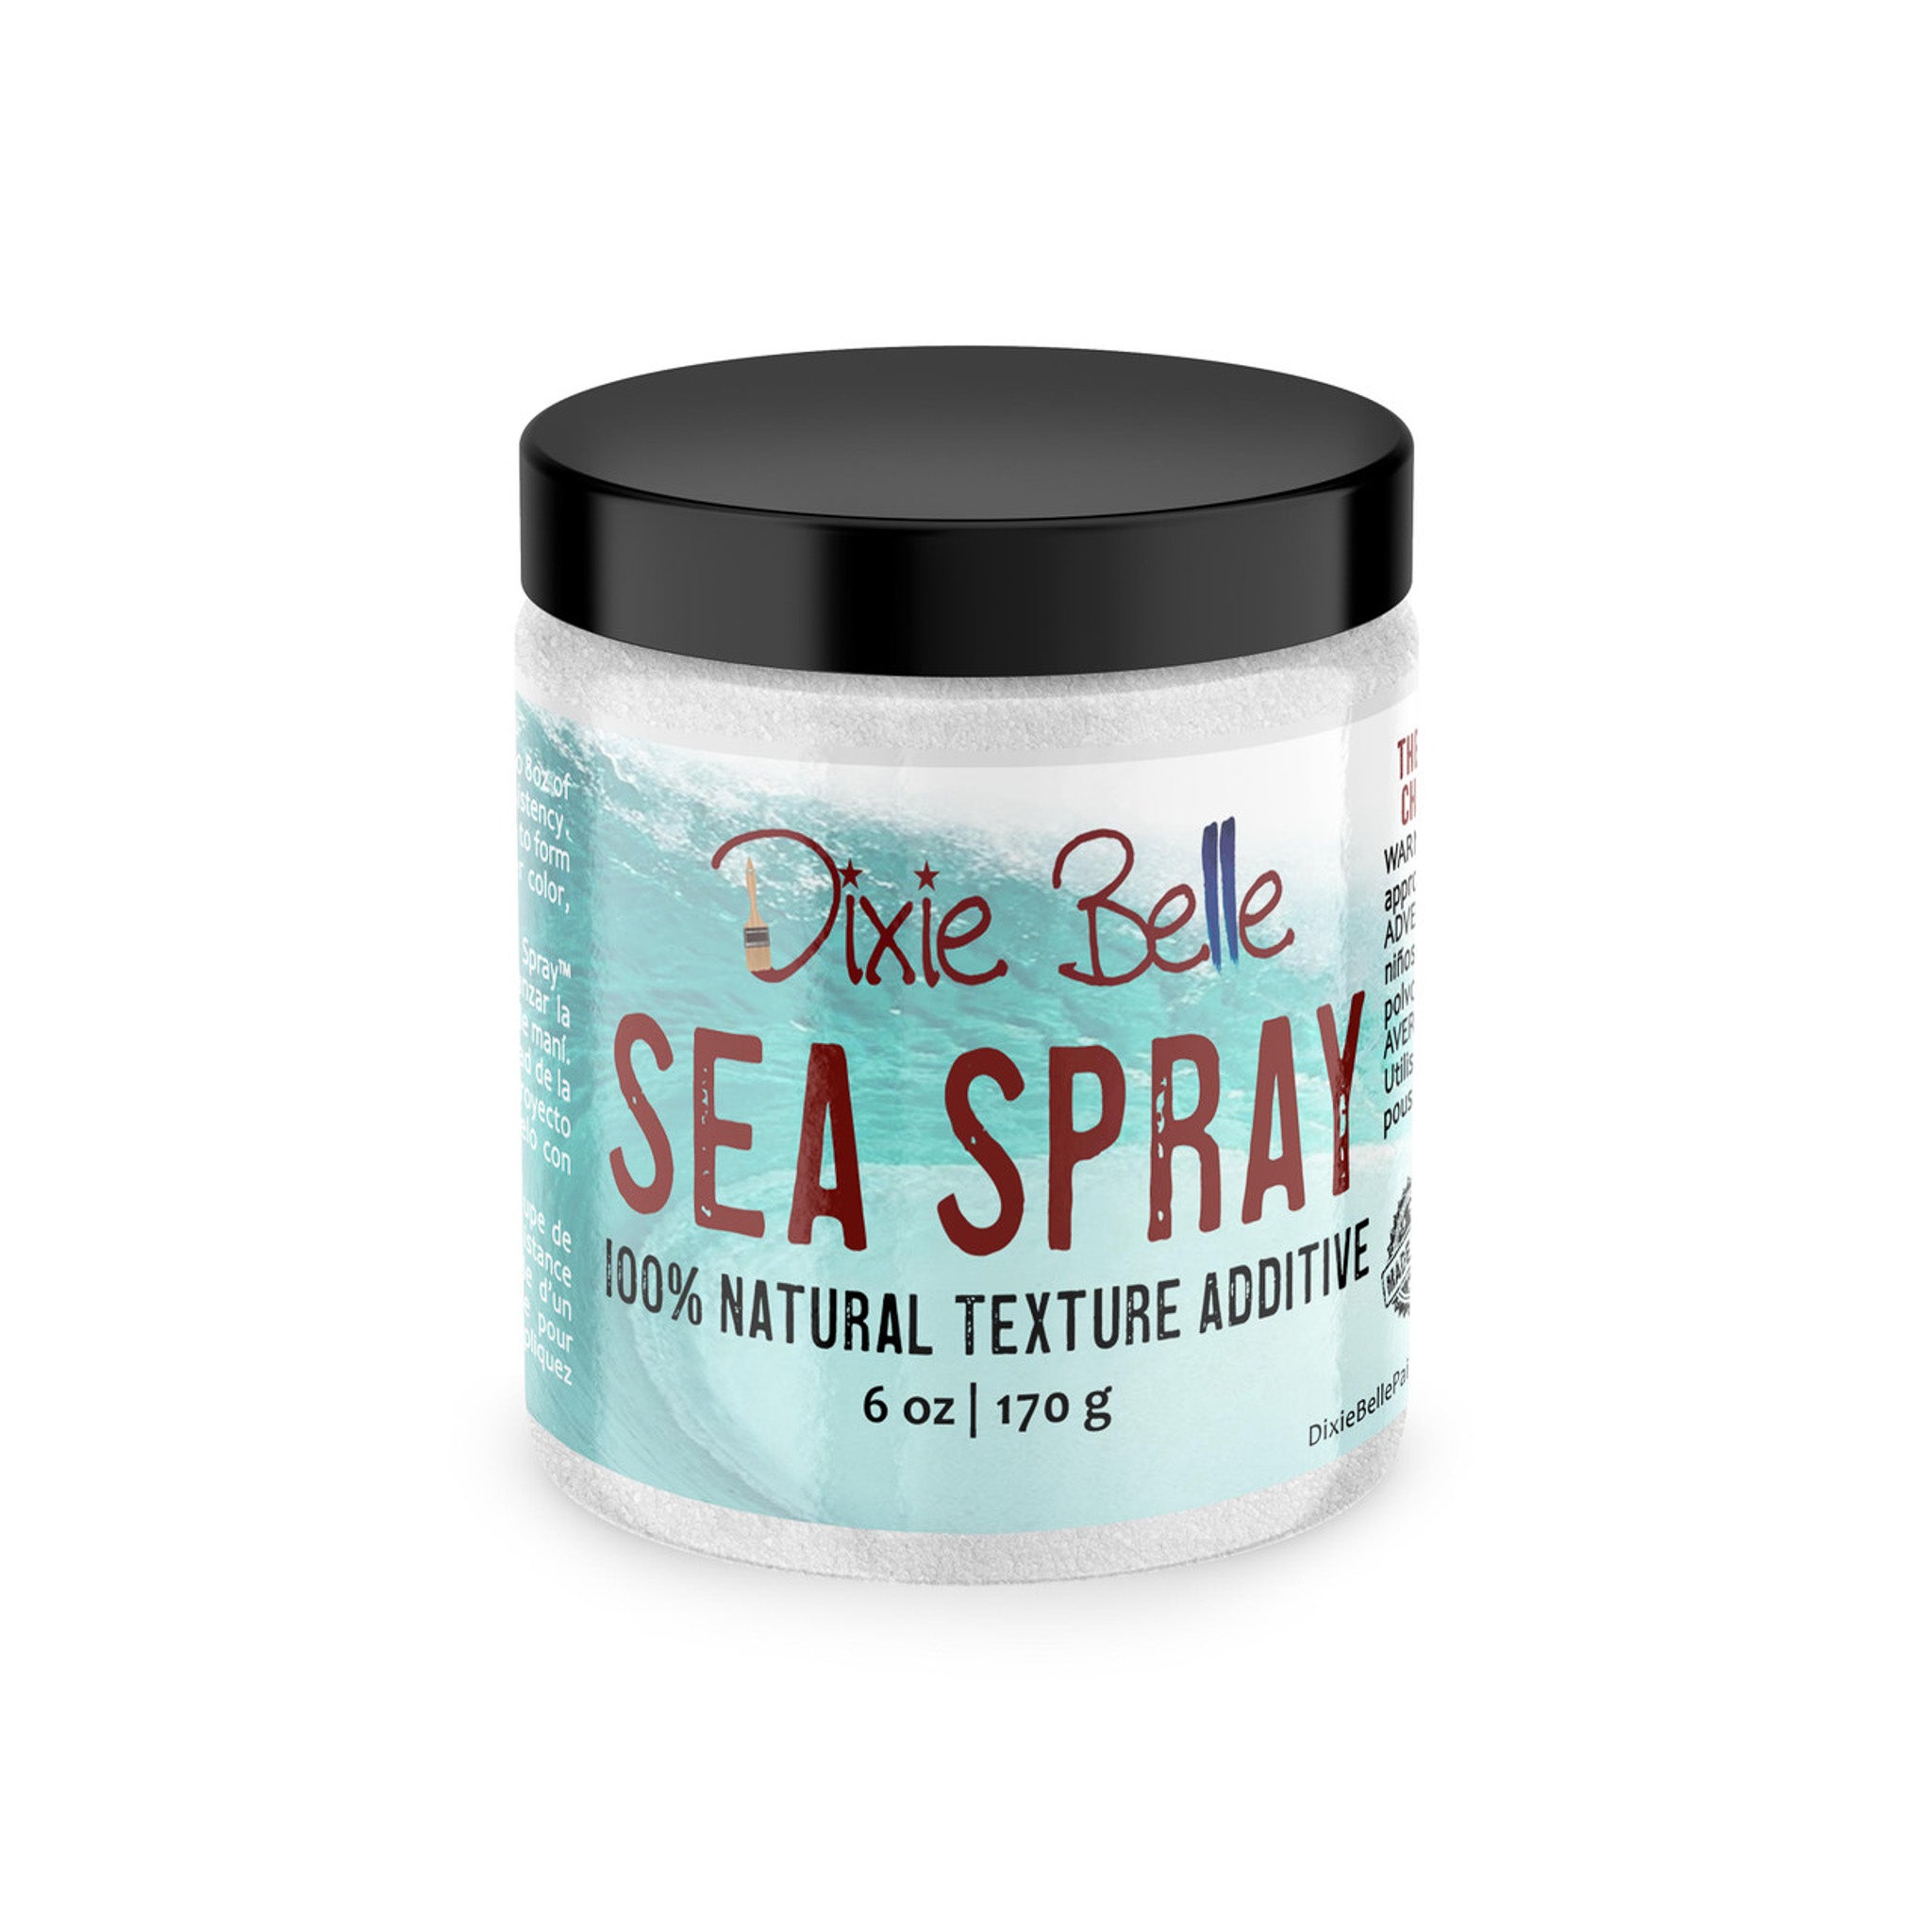 A 6oz/170g container of Dixie Belle Paint Company's Sea Spray Texture Powder, a 100% natural texture additive, is against a white background.